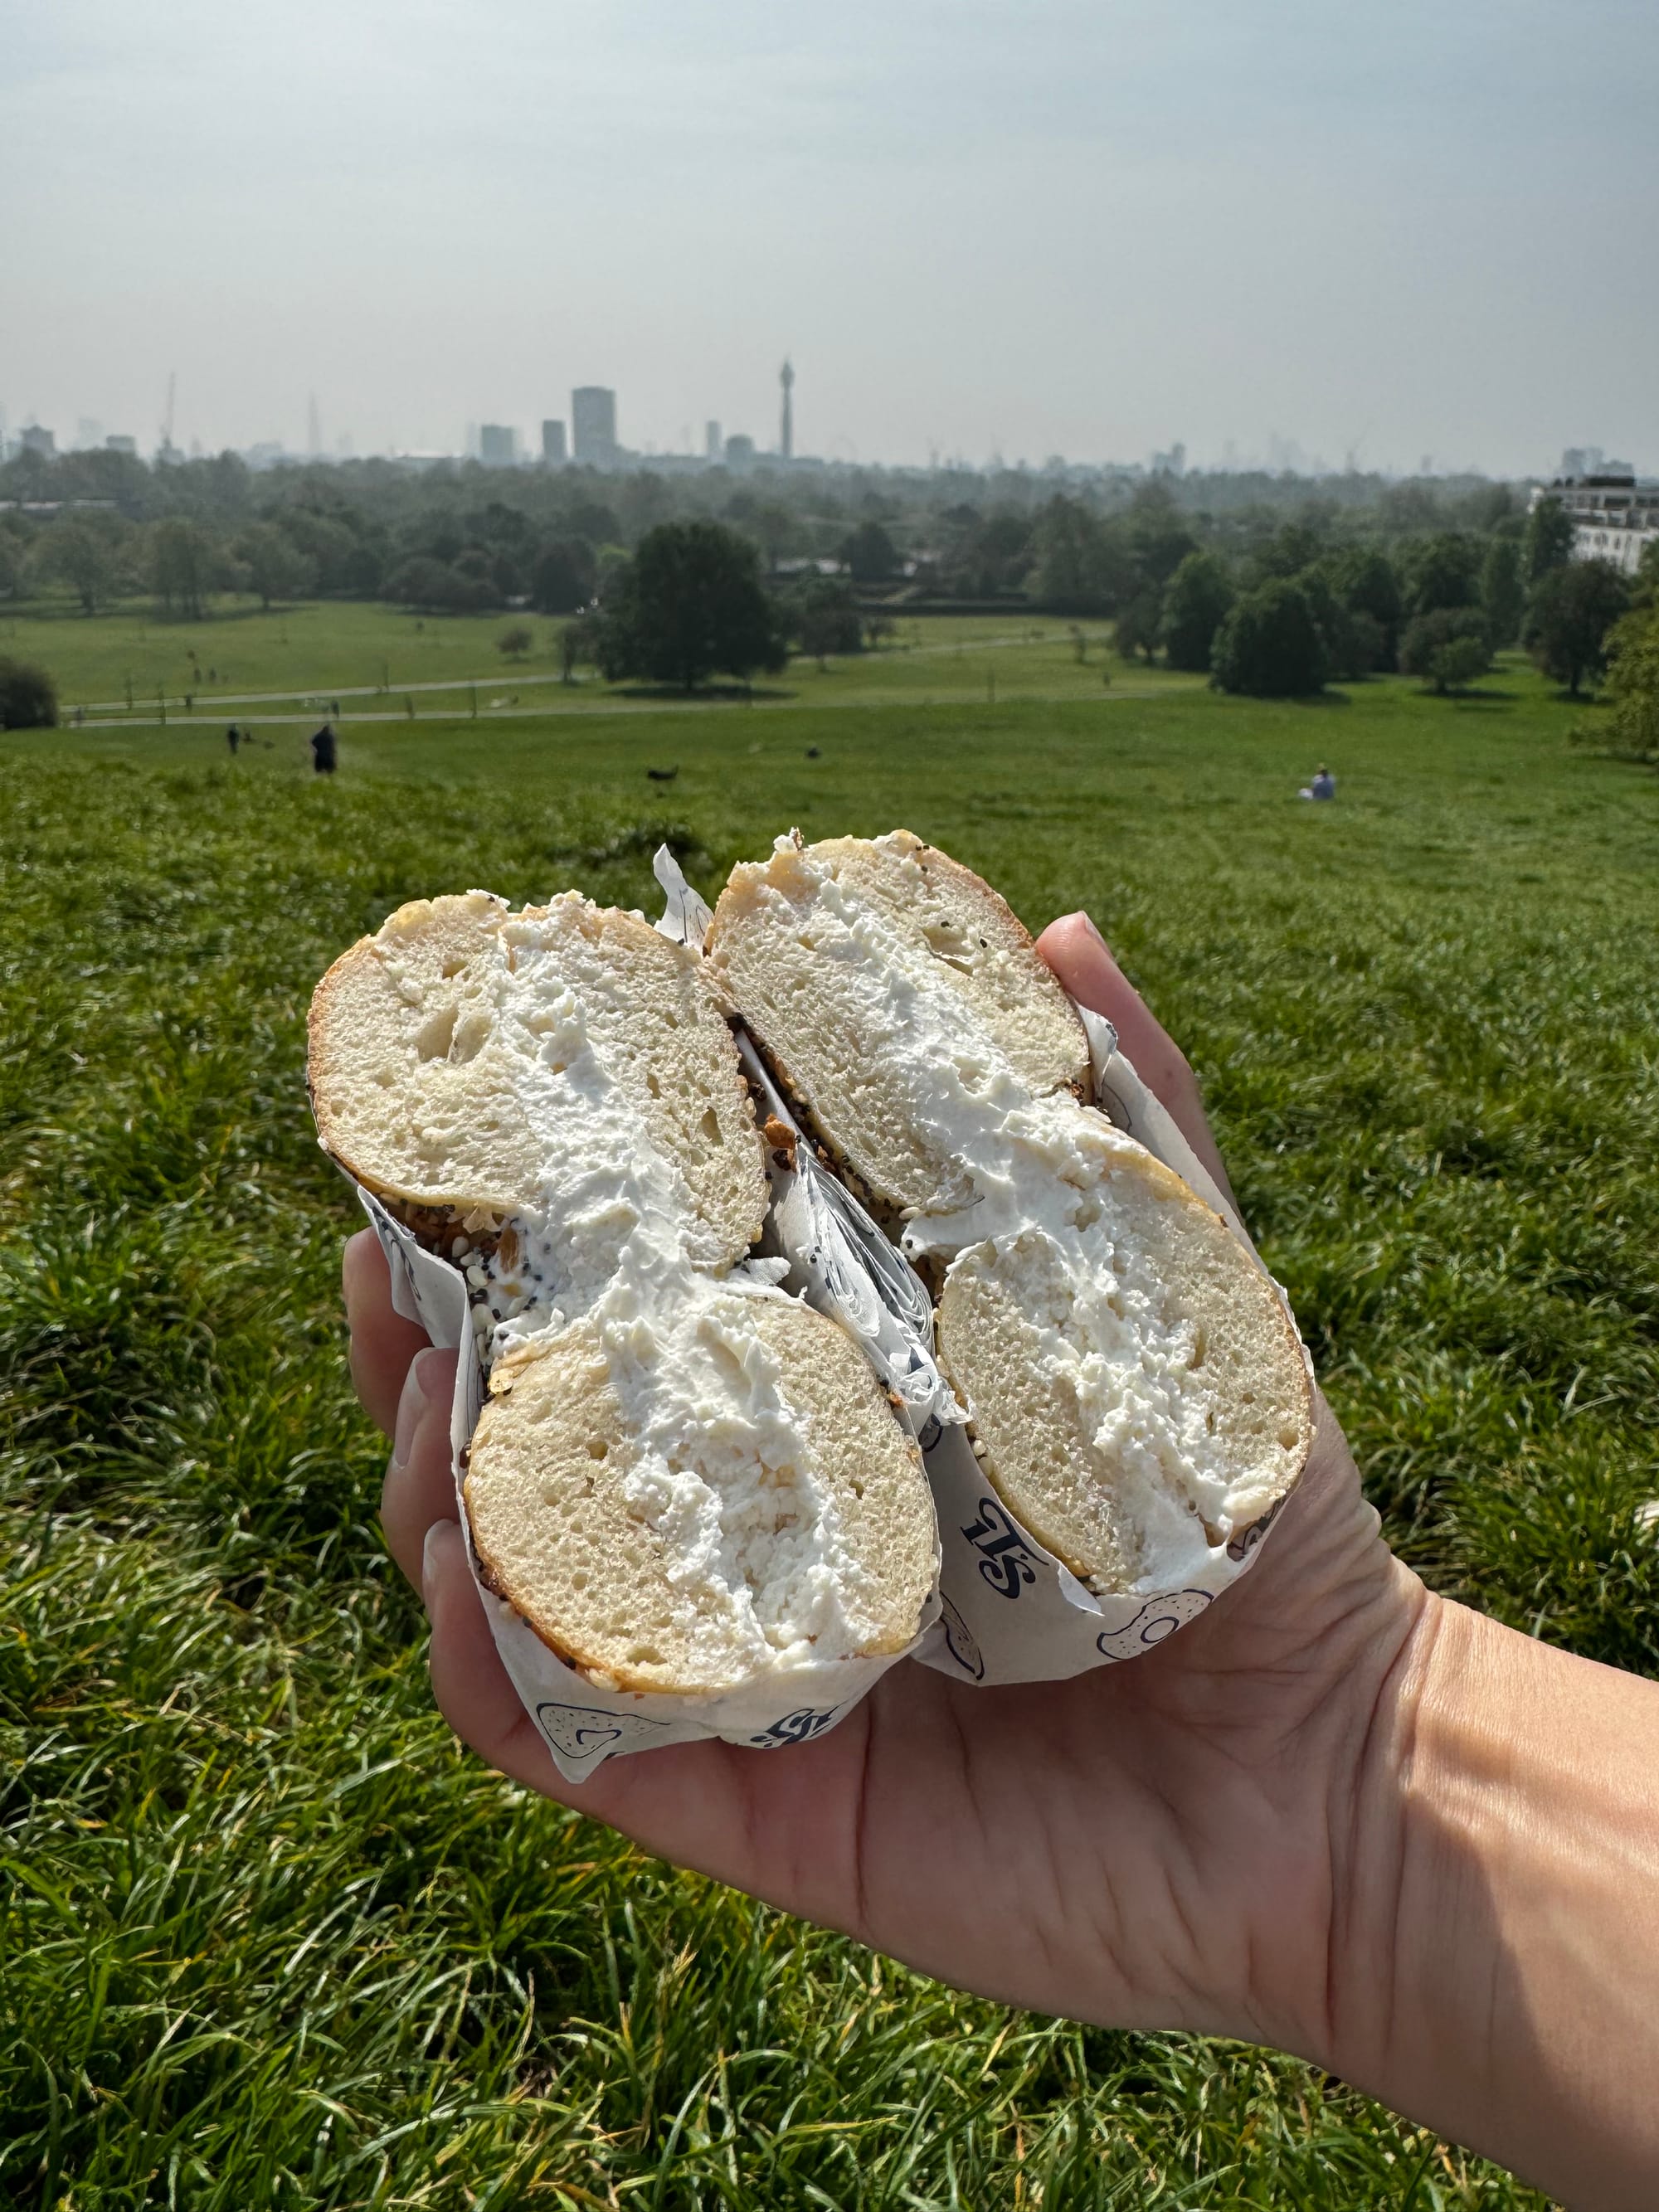 The It's Bagel bagel with plain vegan cream cheese on Primrose Hill, skyline in background.